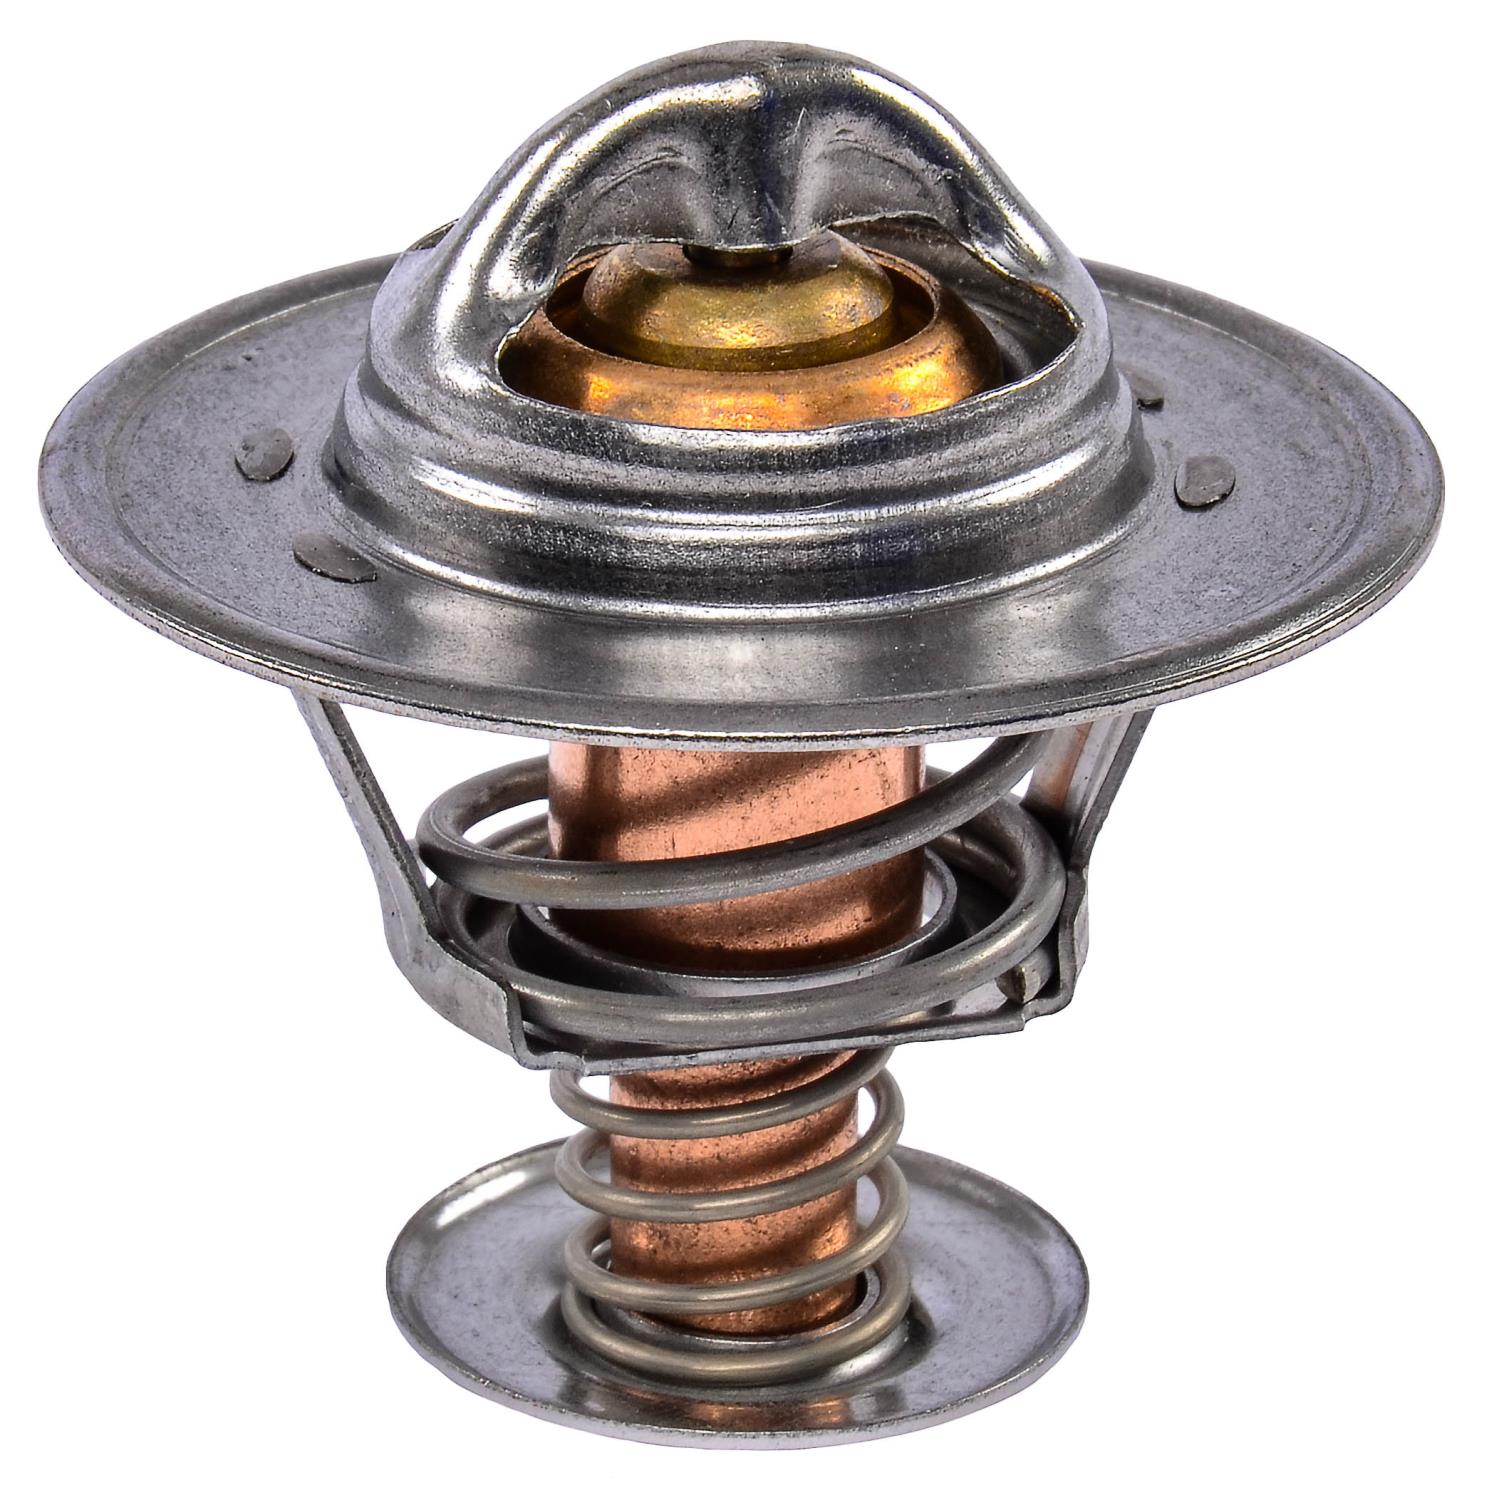 Standard-Flow 195 degree Thermostat for Ford, Lincoln, Mercury, Peugeot